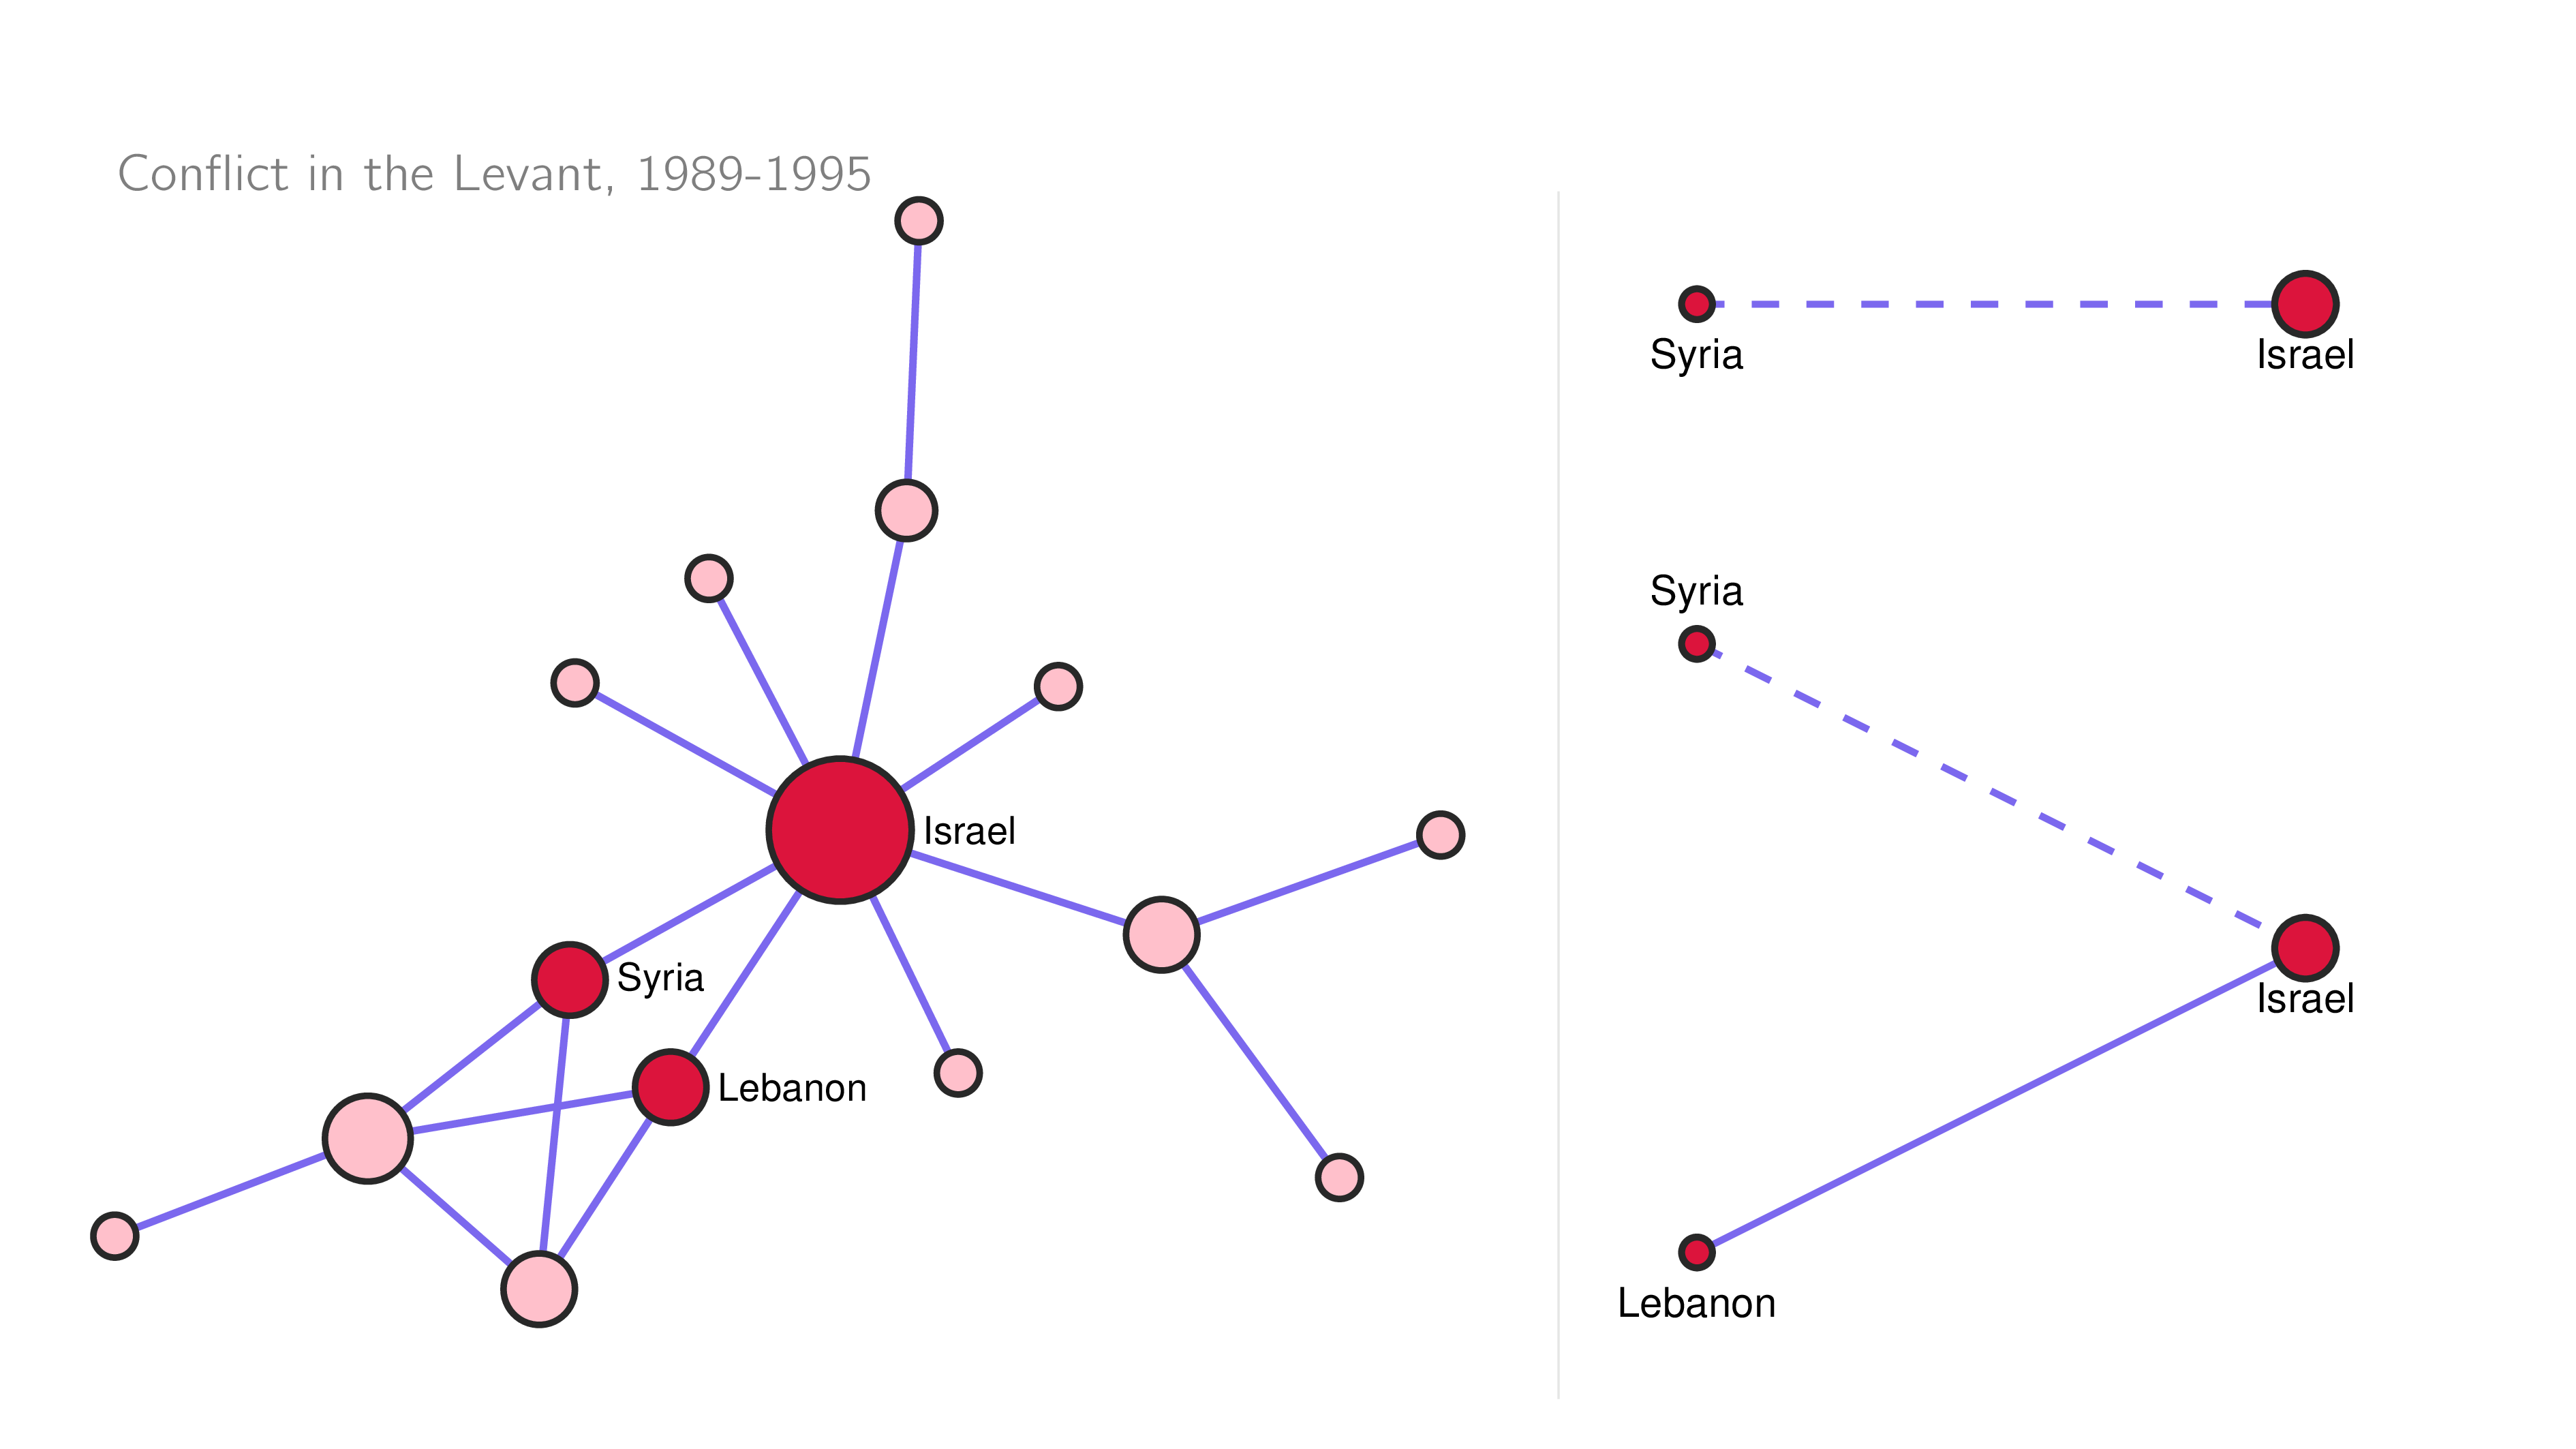 Network plot with conflict in the Levant region, 1989-1995.